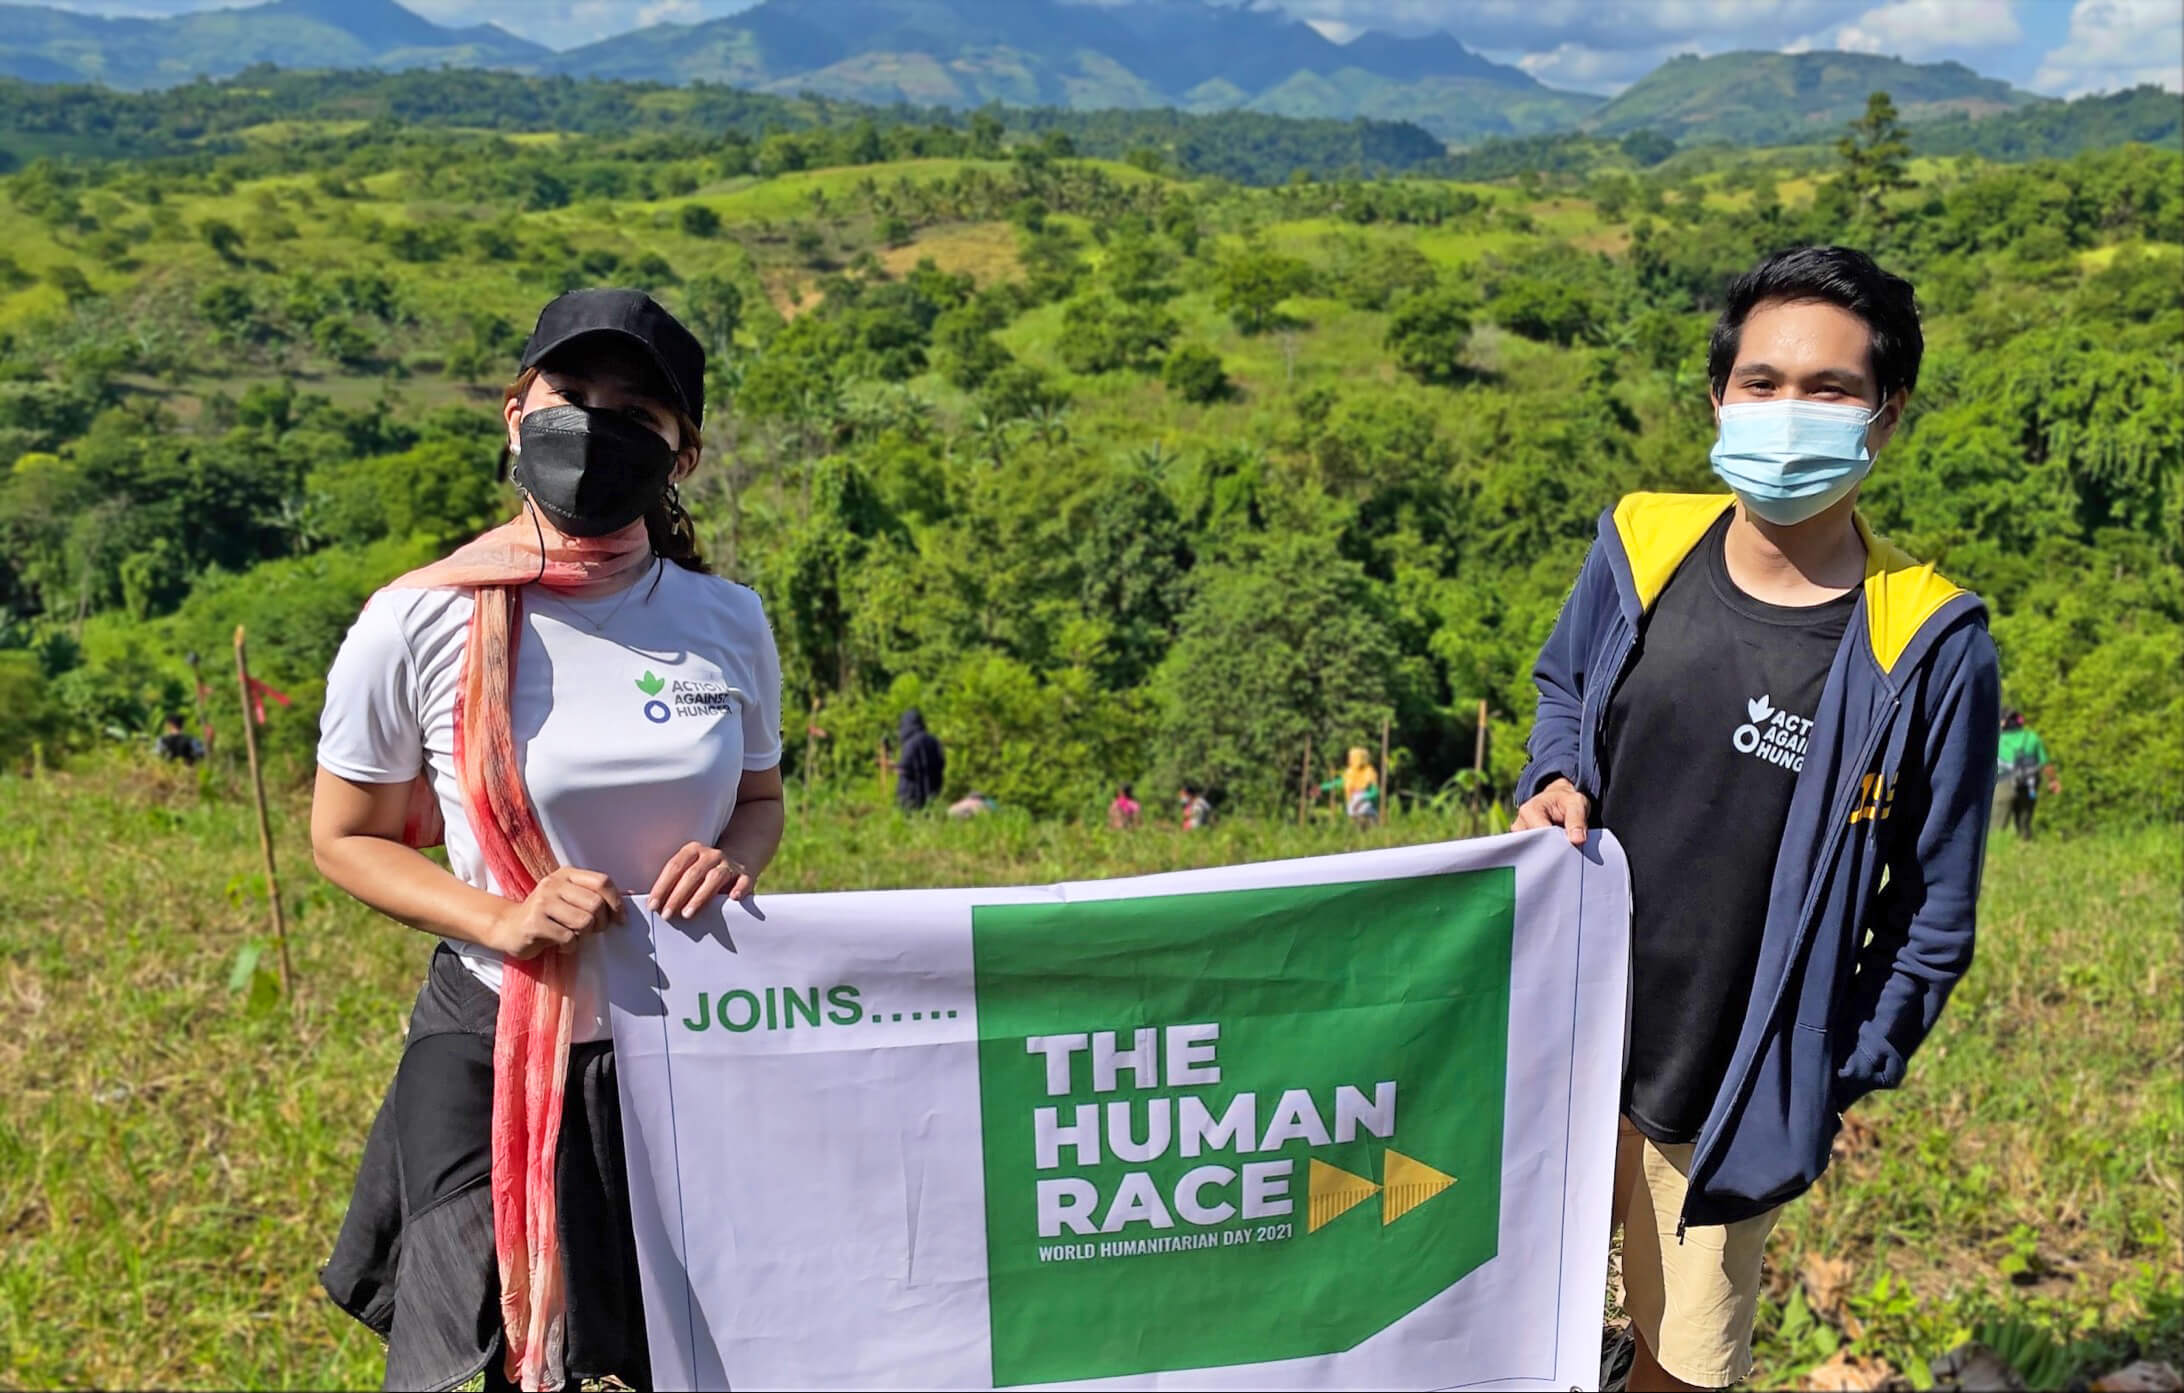 Two individuals carrying a white banner with the text "Joins..." along with #TheHumanRace logo (Green square with bold white capitalized text 'THE HUMAN RACE' followed by two yellow arrows, and a small text a the bottom 'World Humanitarian Day 2021'